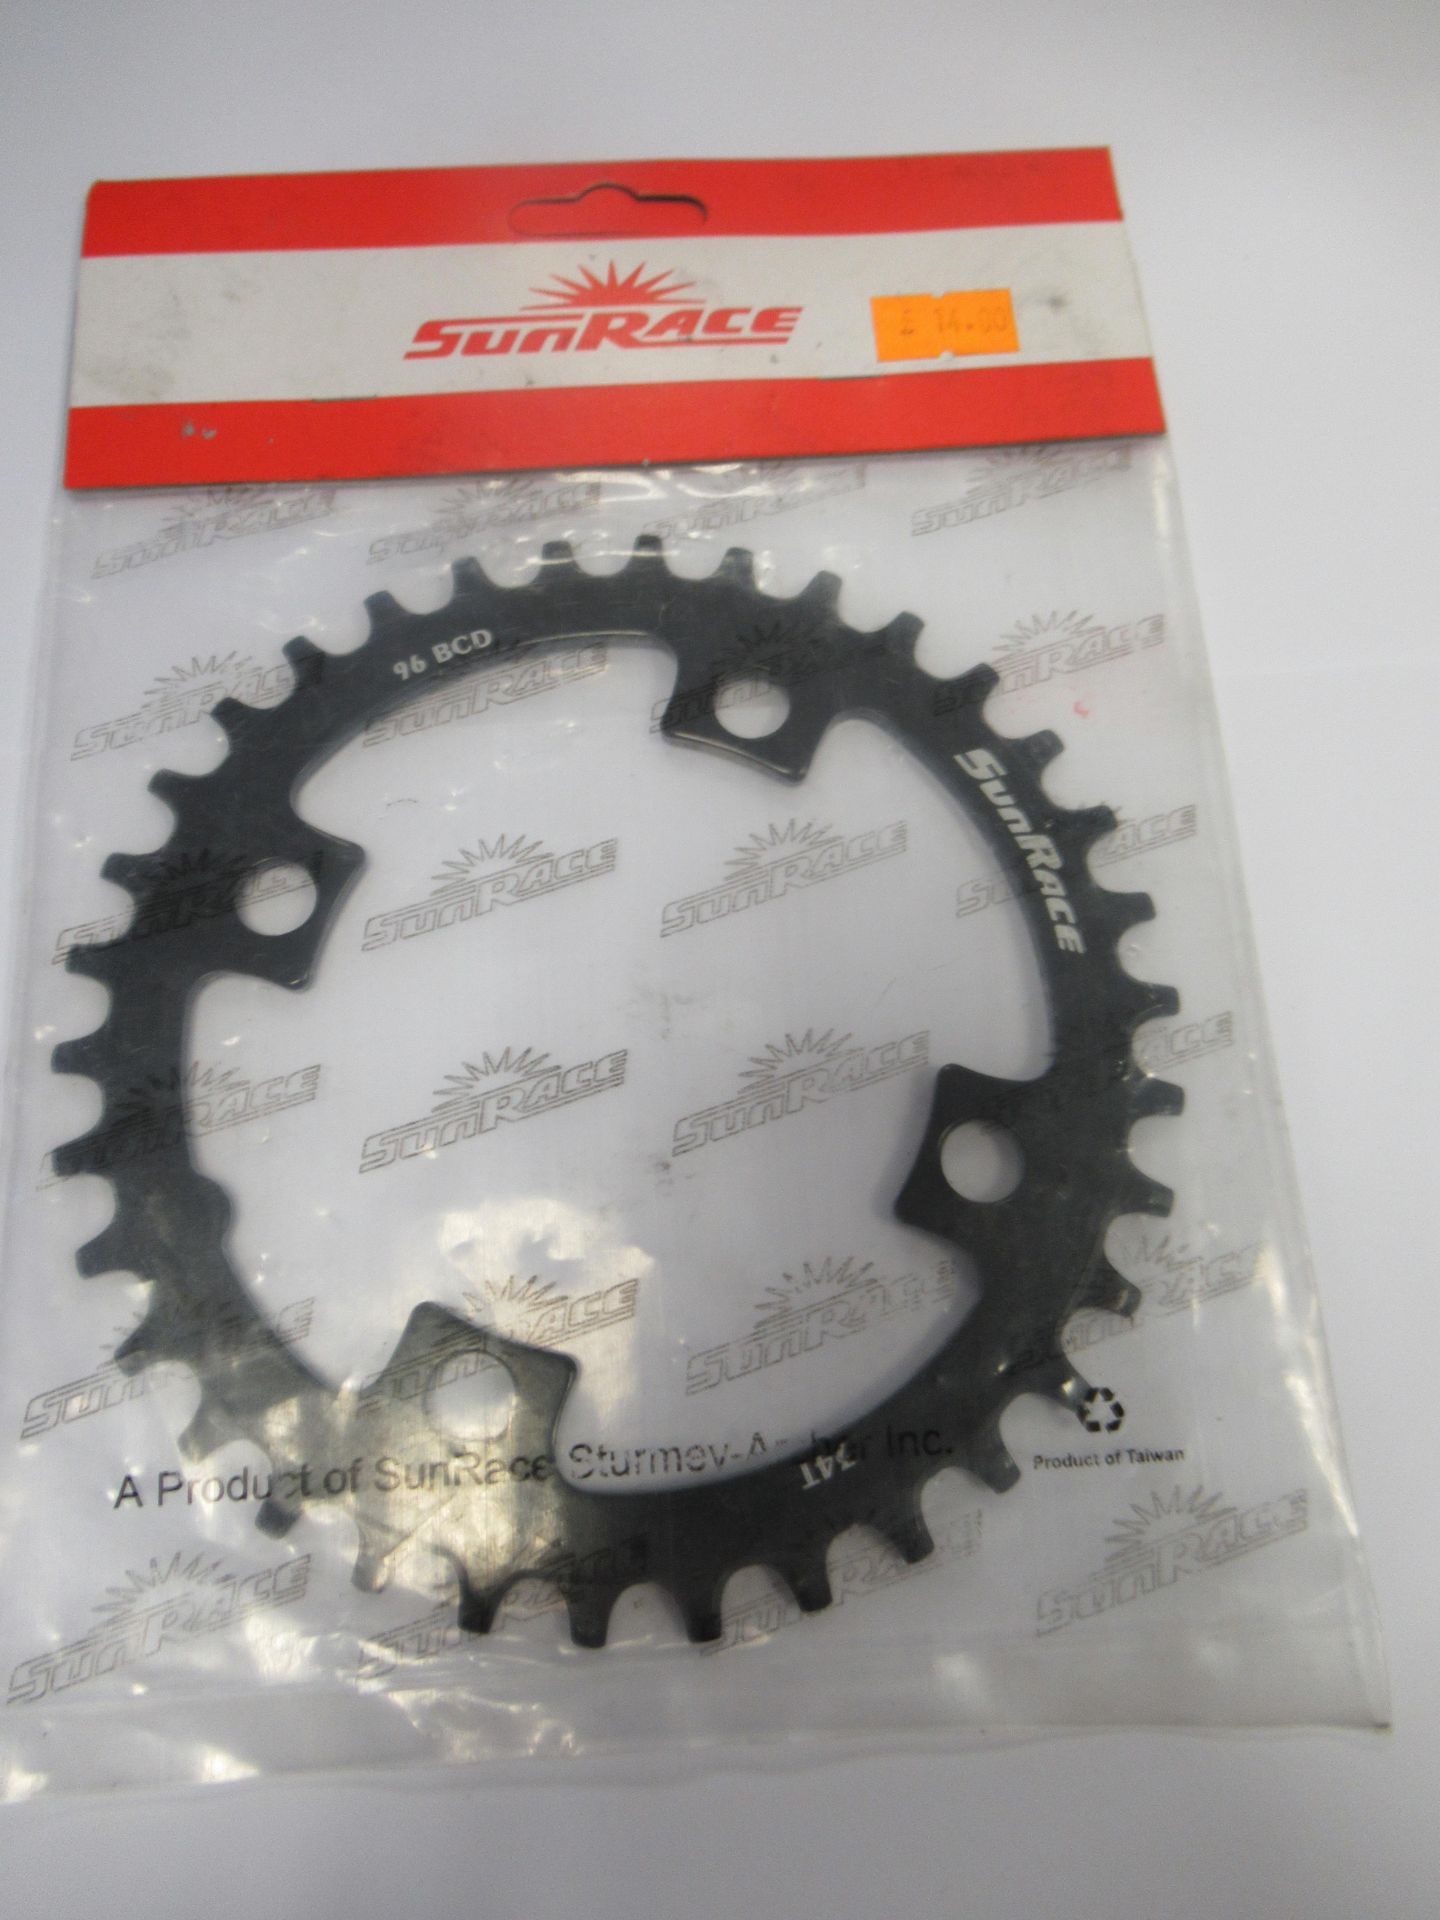 Sunrace Black Chain Rings - Image 14 of 17